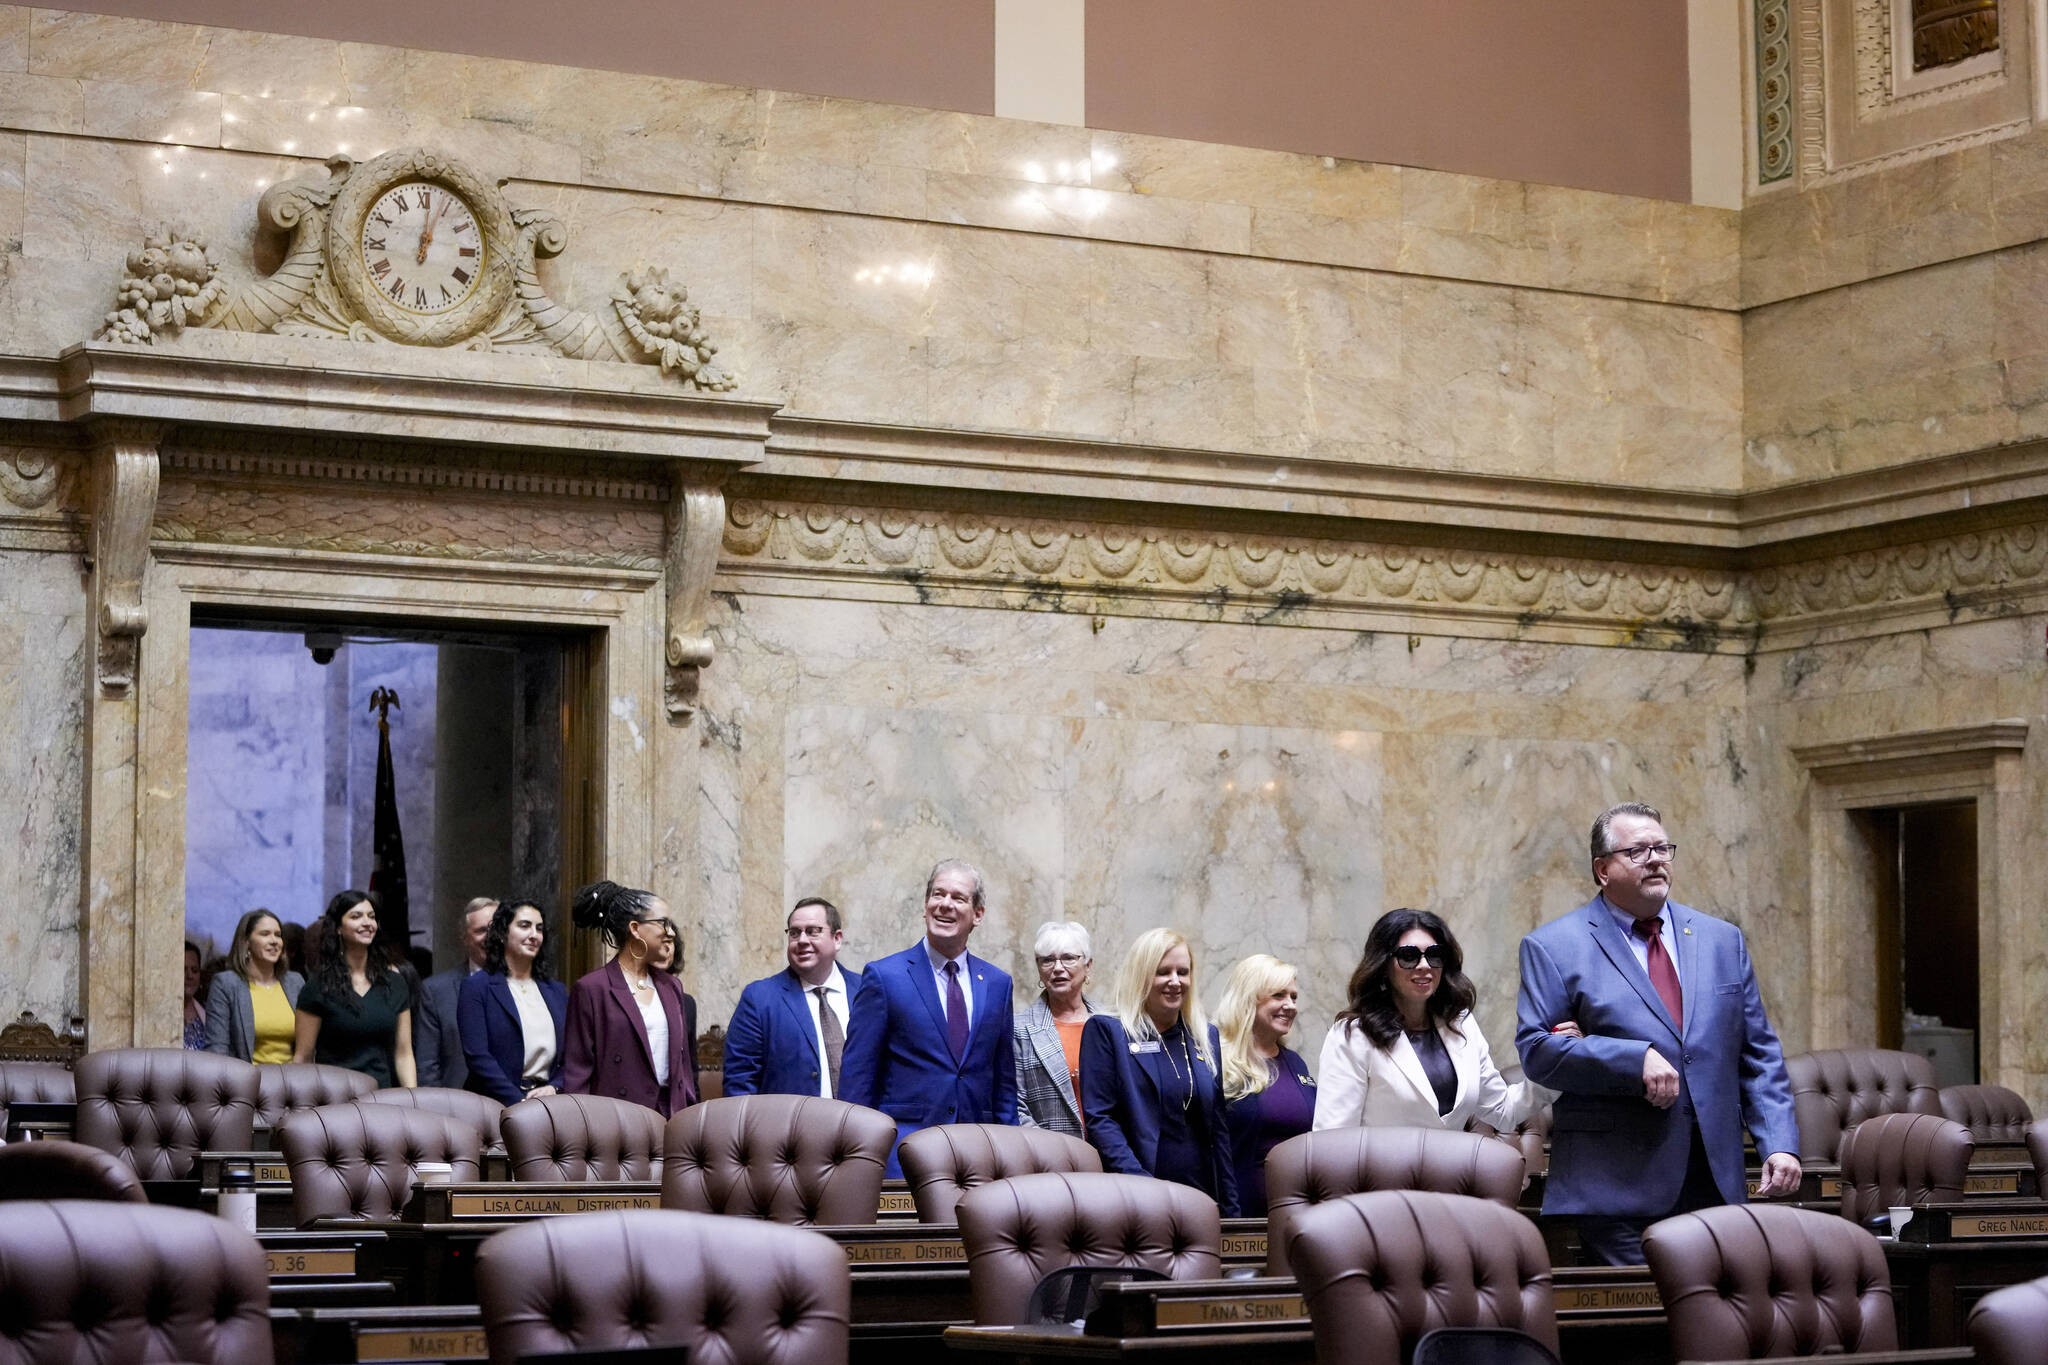 Members of the House, including Rep. Michelle Caldier, R-Gig Harbor, and Rep. Eric Robertson, R-Sumner, at front, walk into the House chambers during opening ceremonies on the first day of the legislative session at the Washington state Capitol on Monday in Olympia. (Lindsey Wasson/The Associated Press)